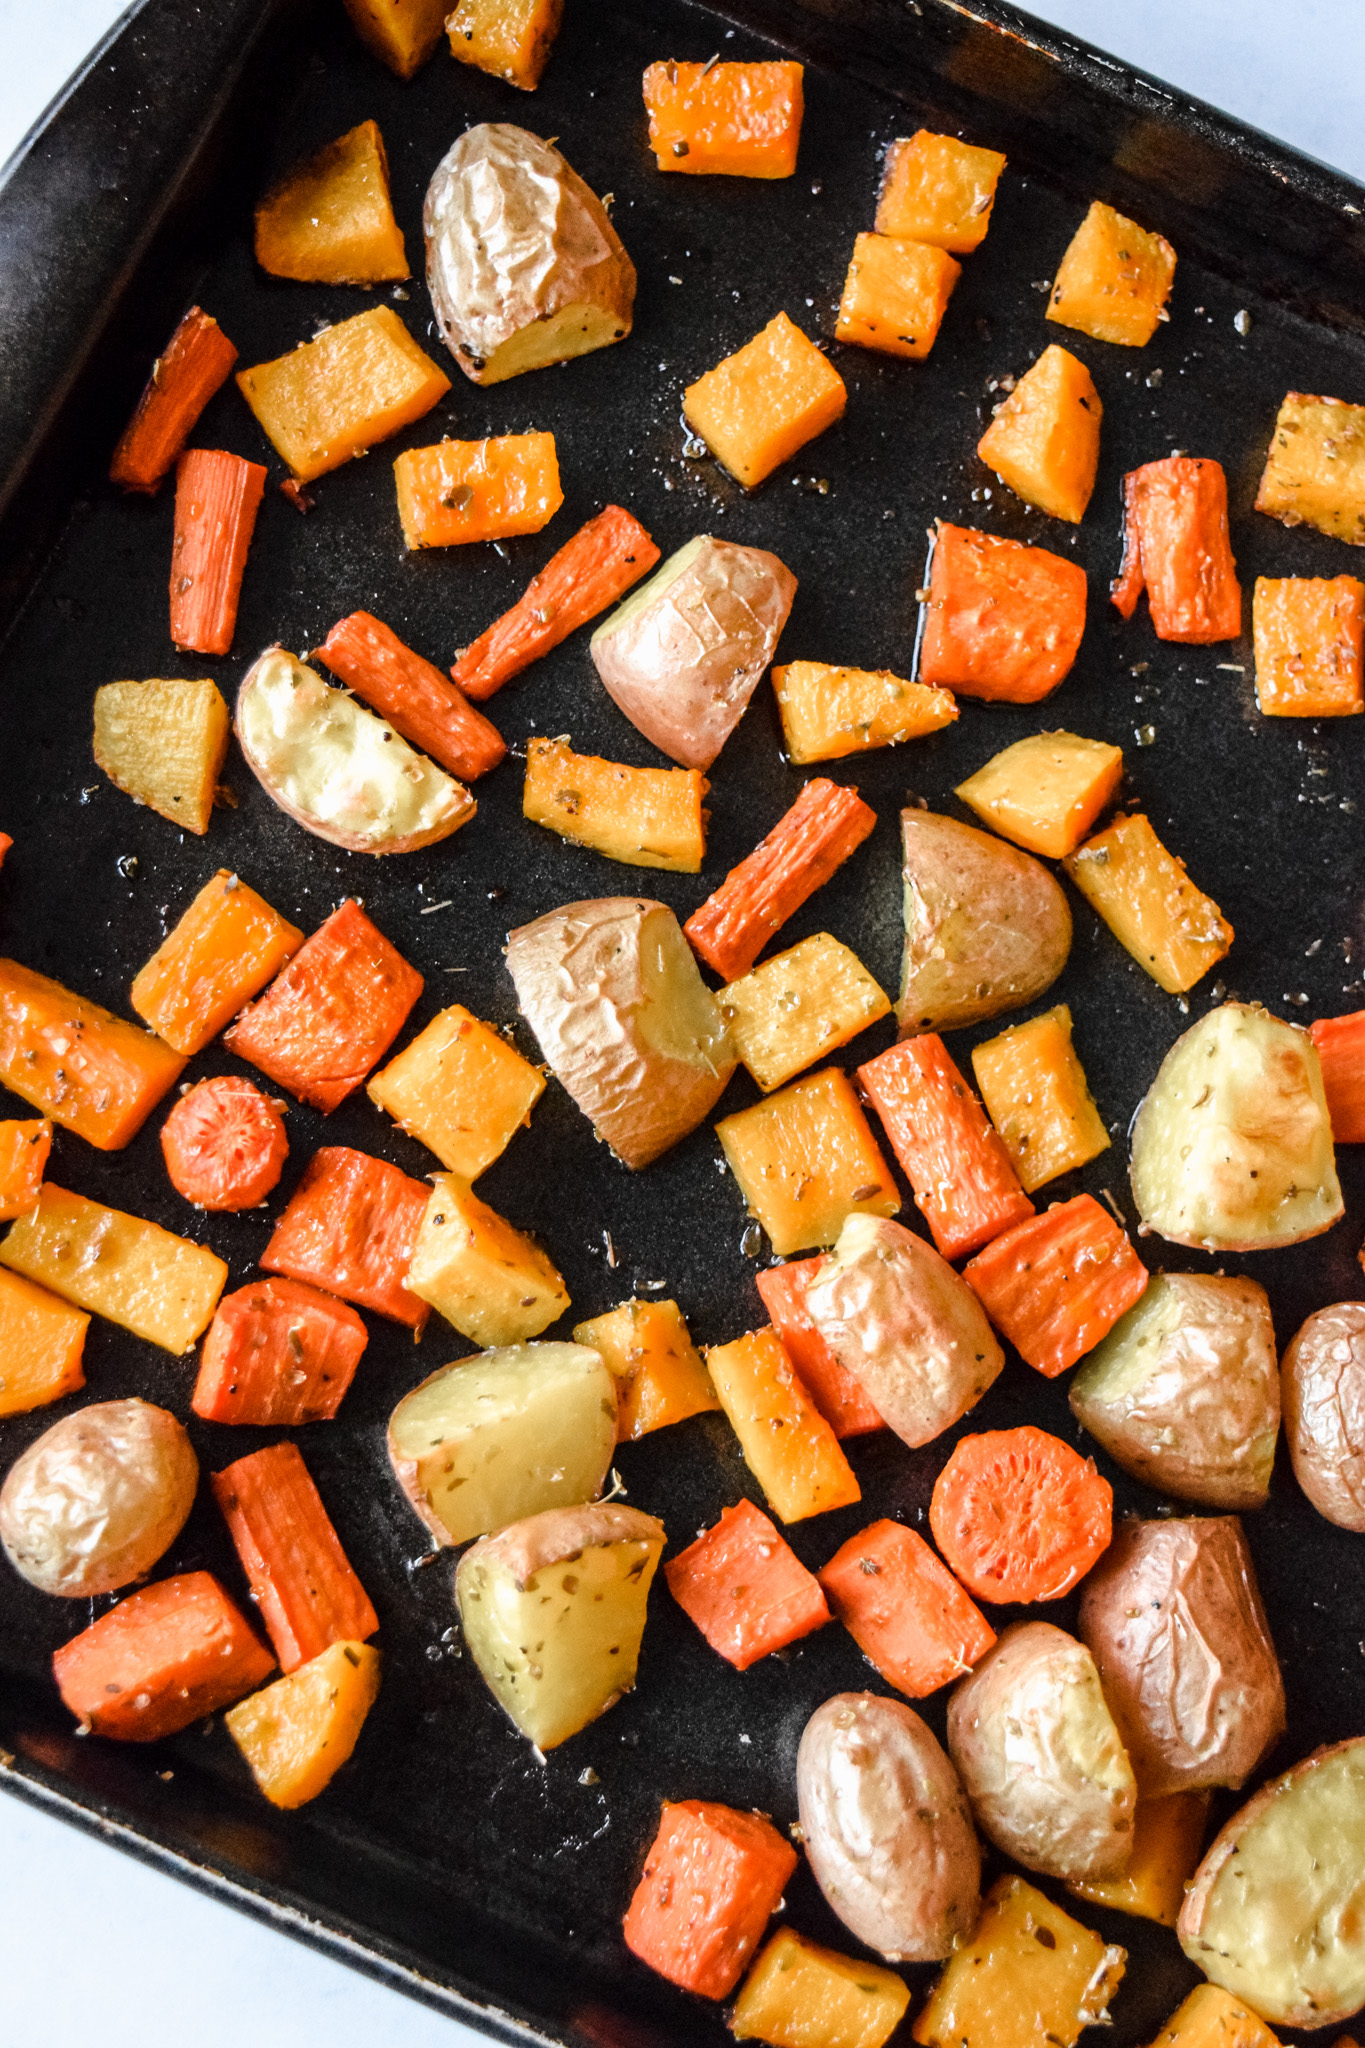 Roasted Winter Vegetables on a Baking Sheet